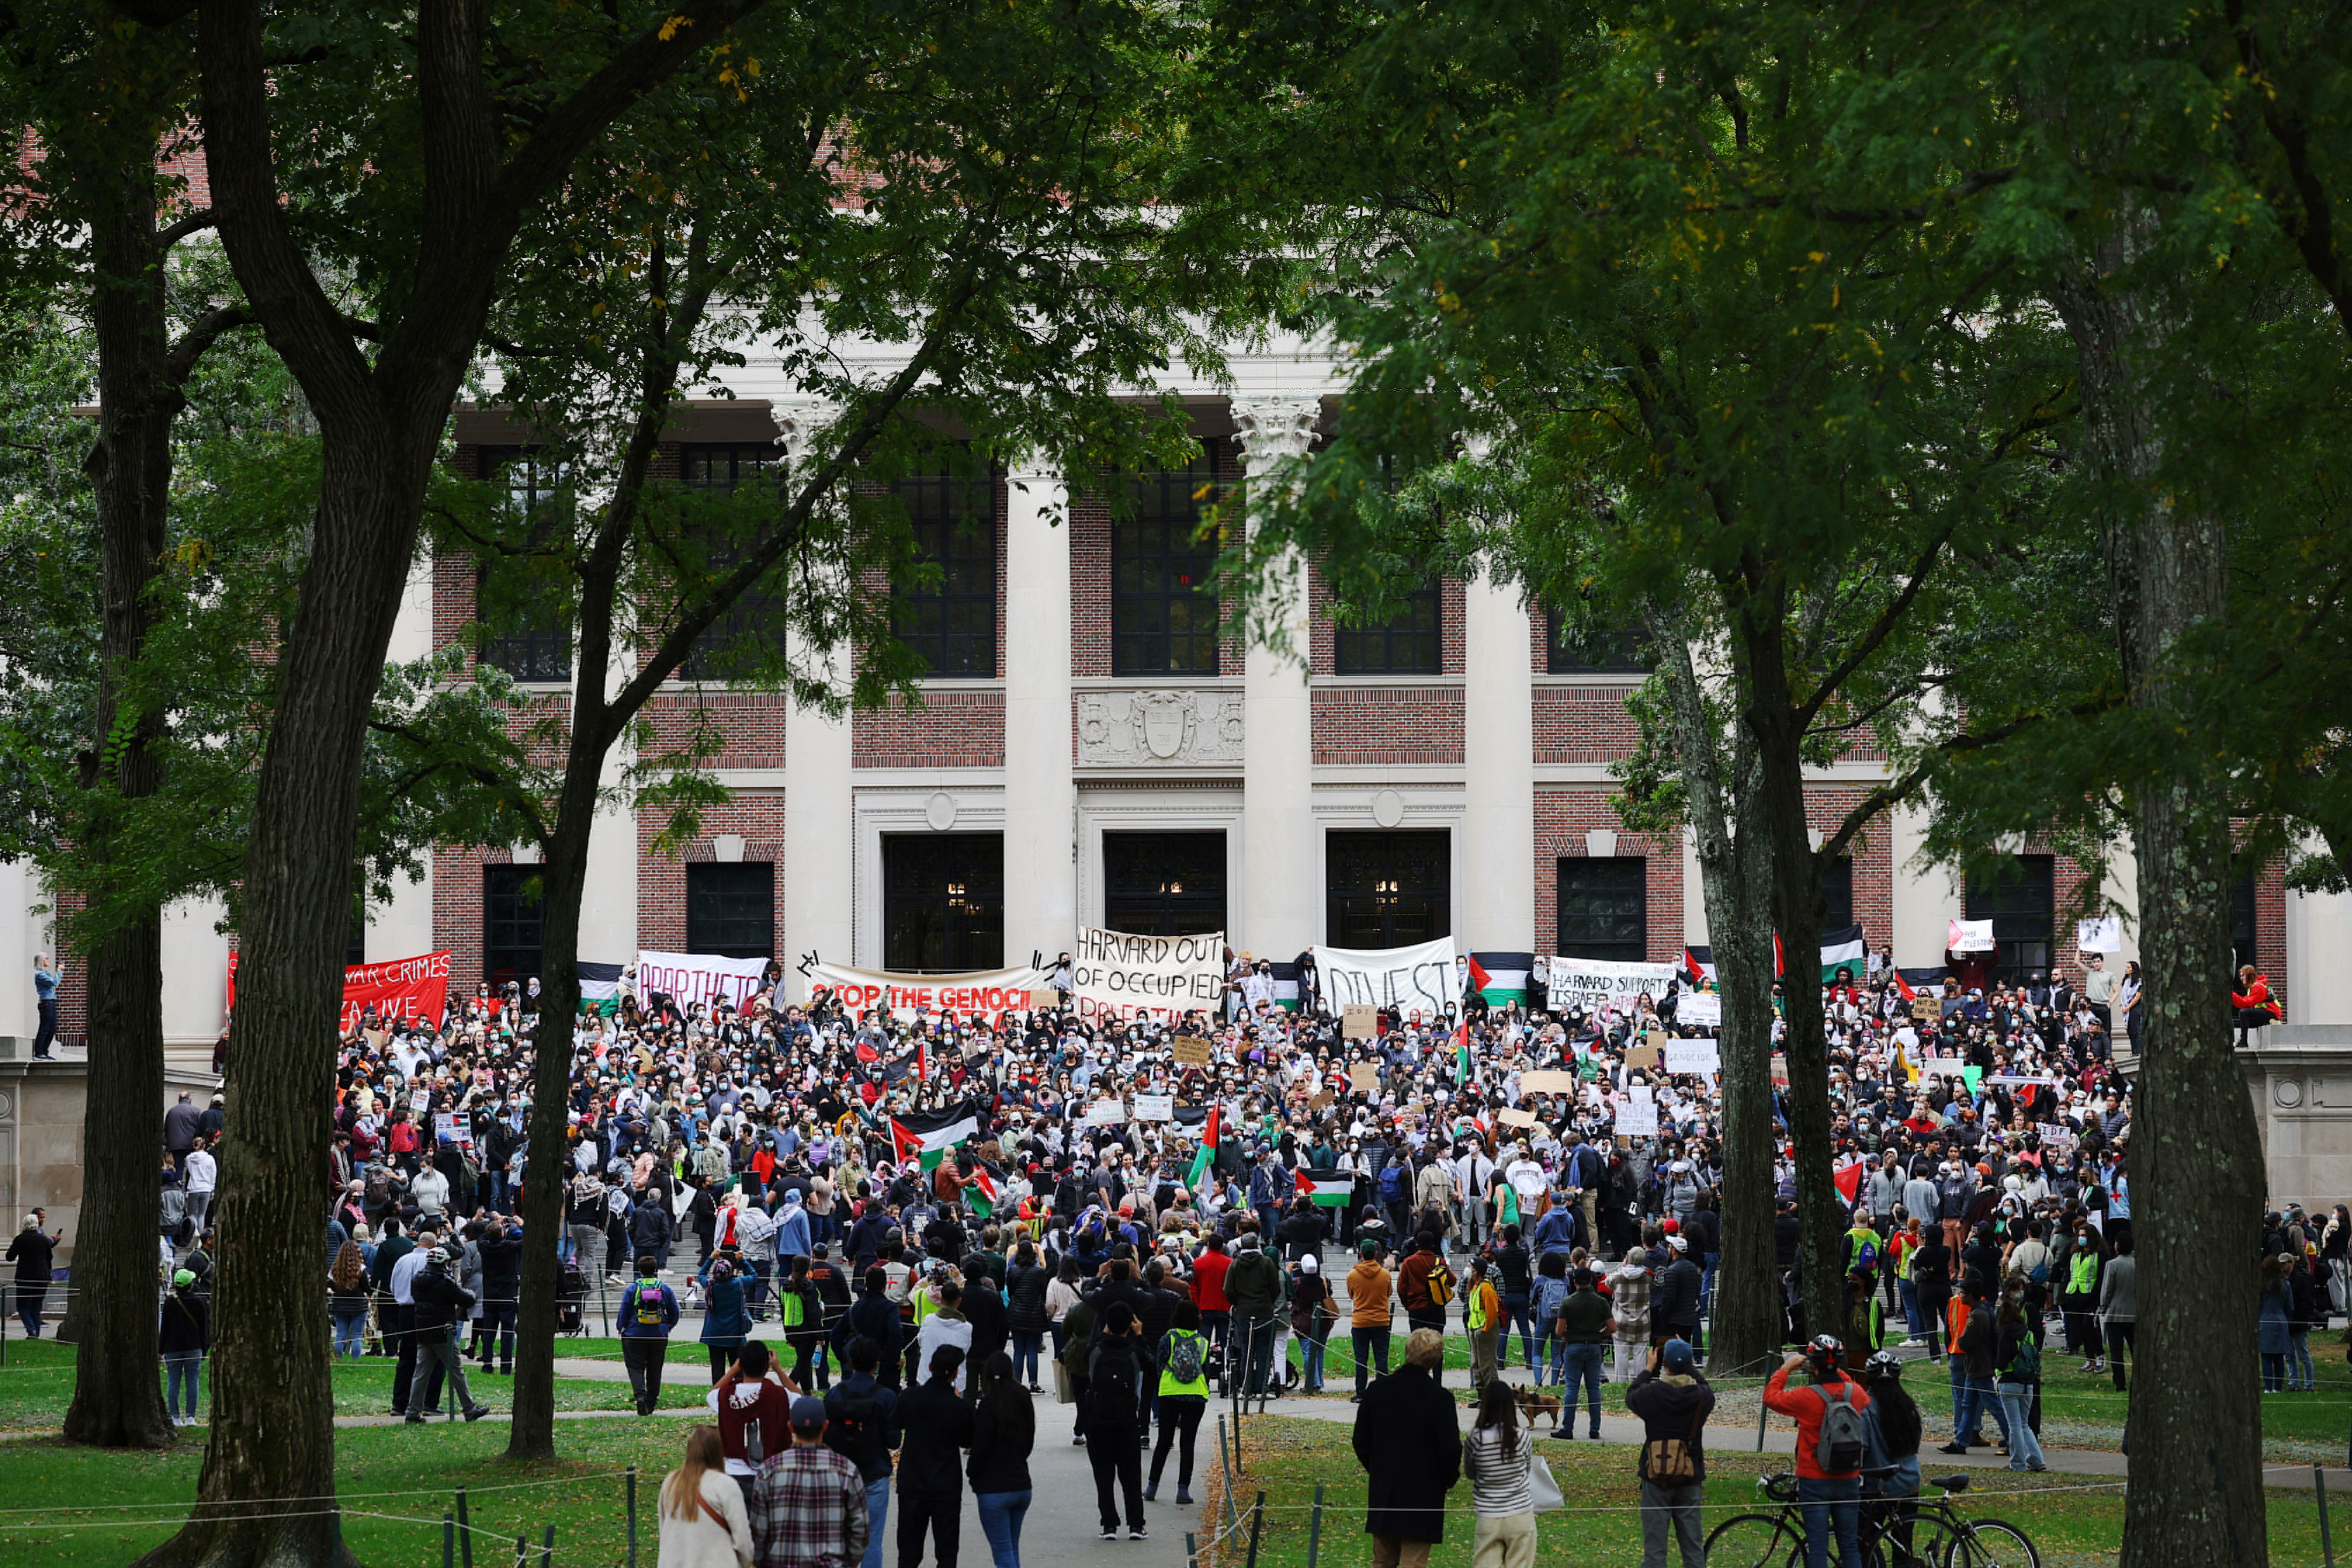 "Stand with Palestinians Under Siege in Gaza" rally at Harvard University in Cambridge